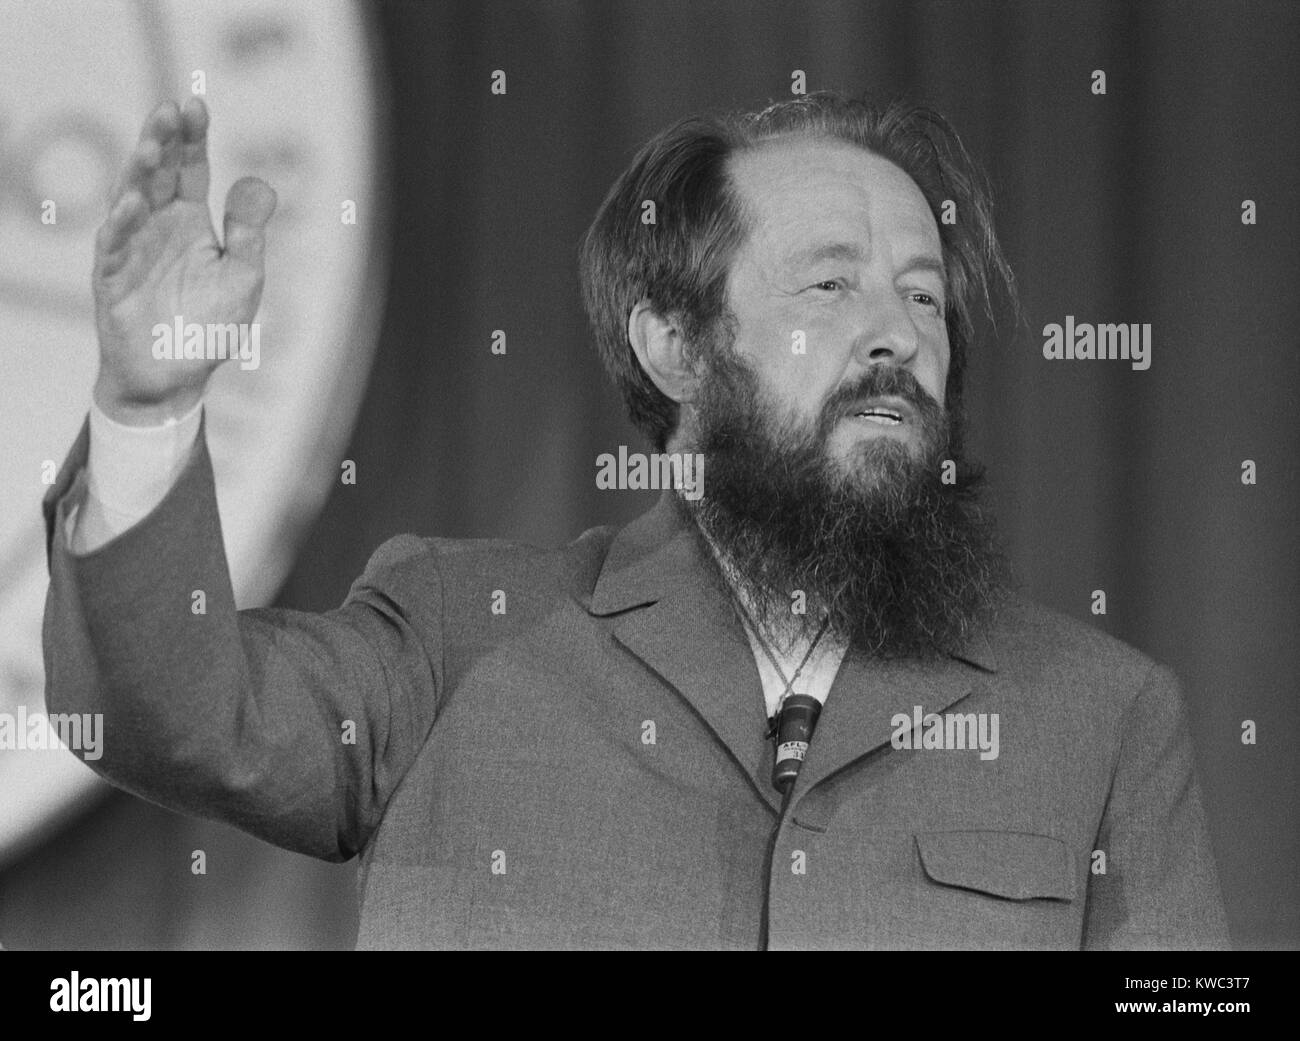 Aleksandr Solzhenitsyn, speaking on June 31, 1975, during his exile from Soviet Russia. The Nobel Prize winning novelist and historian was expelled from the Soviet Union in 1974. He came to the US on the invitation of Stanford University and lived in Cavendish, Vermont from 1976 until his return to Russia in 1994. (BSLOC 2015 14 184) Stock Photo